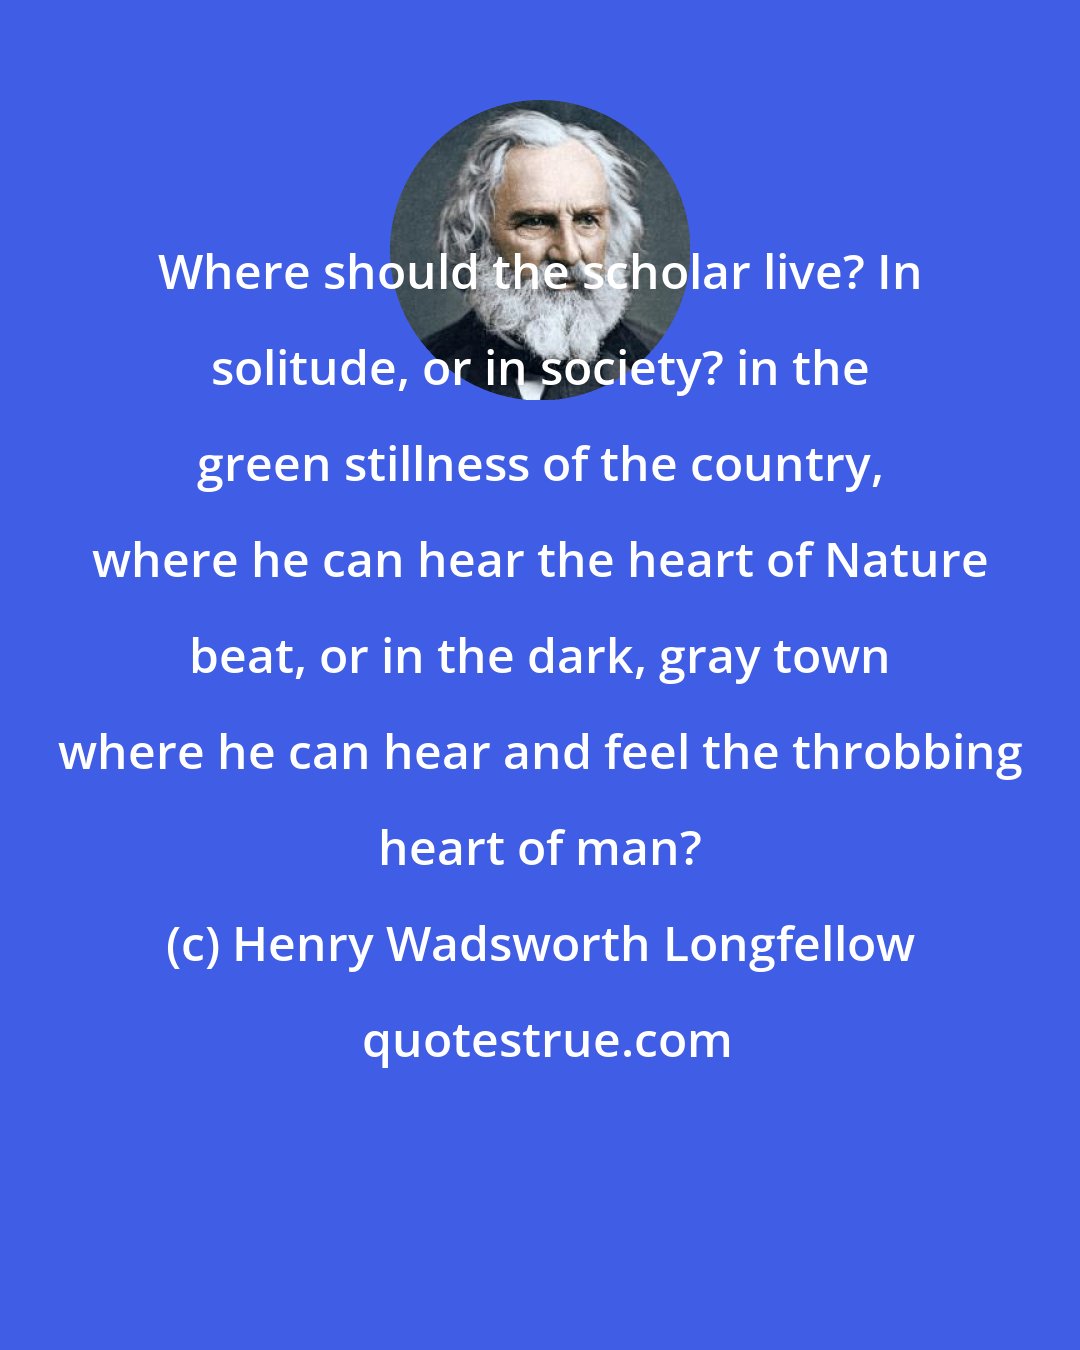 Henry Wadsworth Longfellow: Where should the scholar live? In solitude, or in society? in the green stillness of the country, where he can hear the heart of Nature beat, or in the dark, gray town where he can hear and feel the throbbing heart of man?